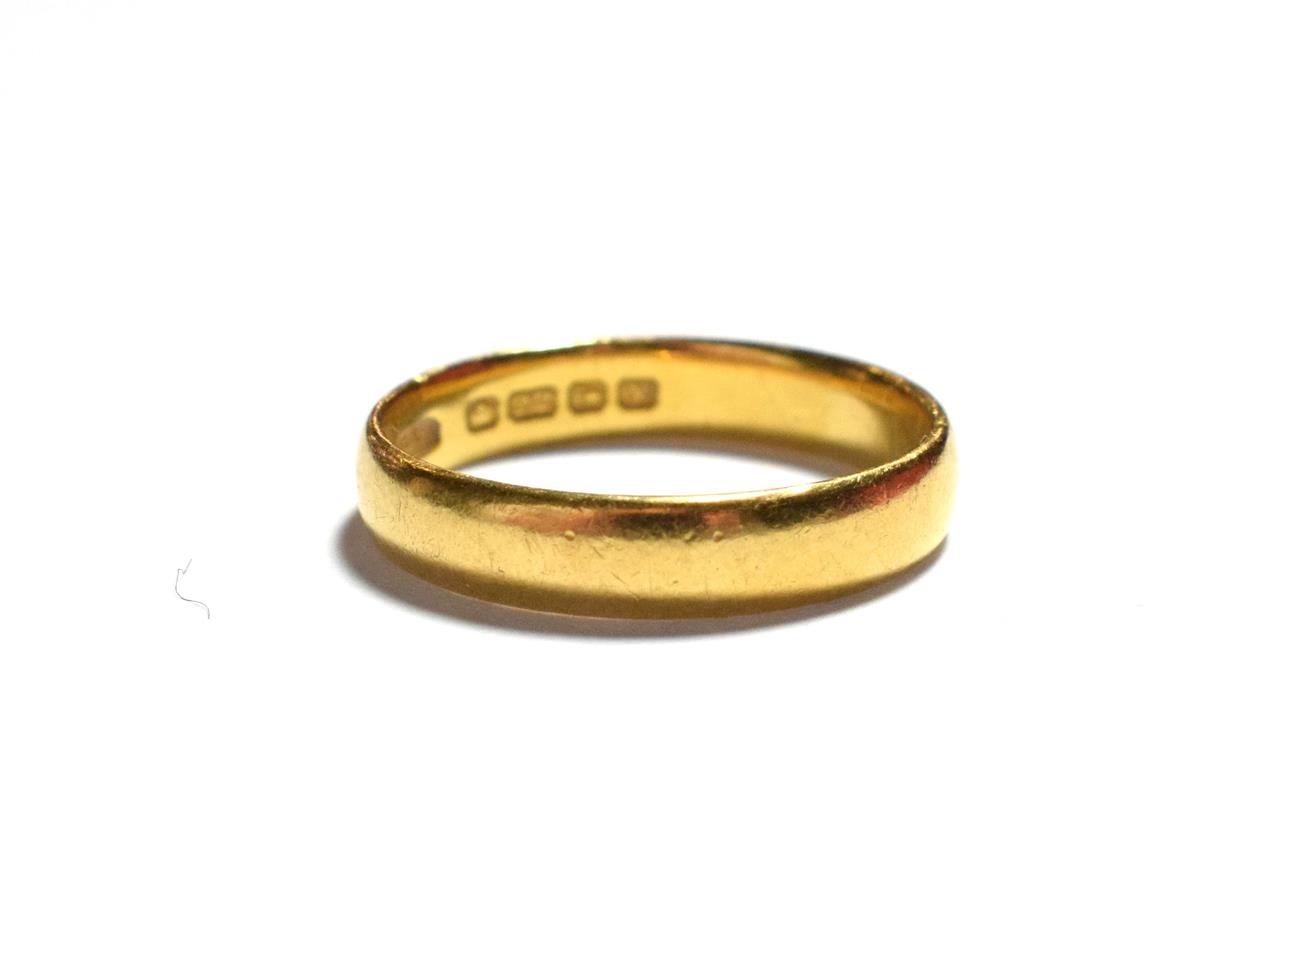 Lot 177 - A 22 carat gold band ring, finger size O